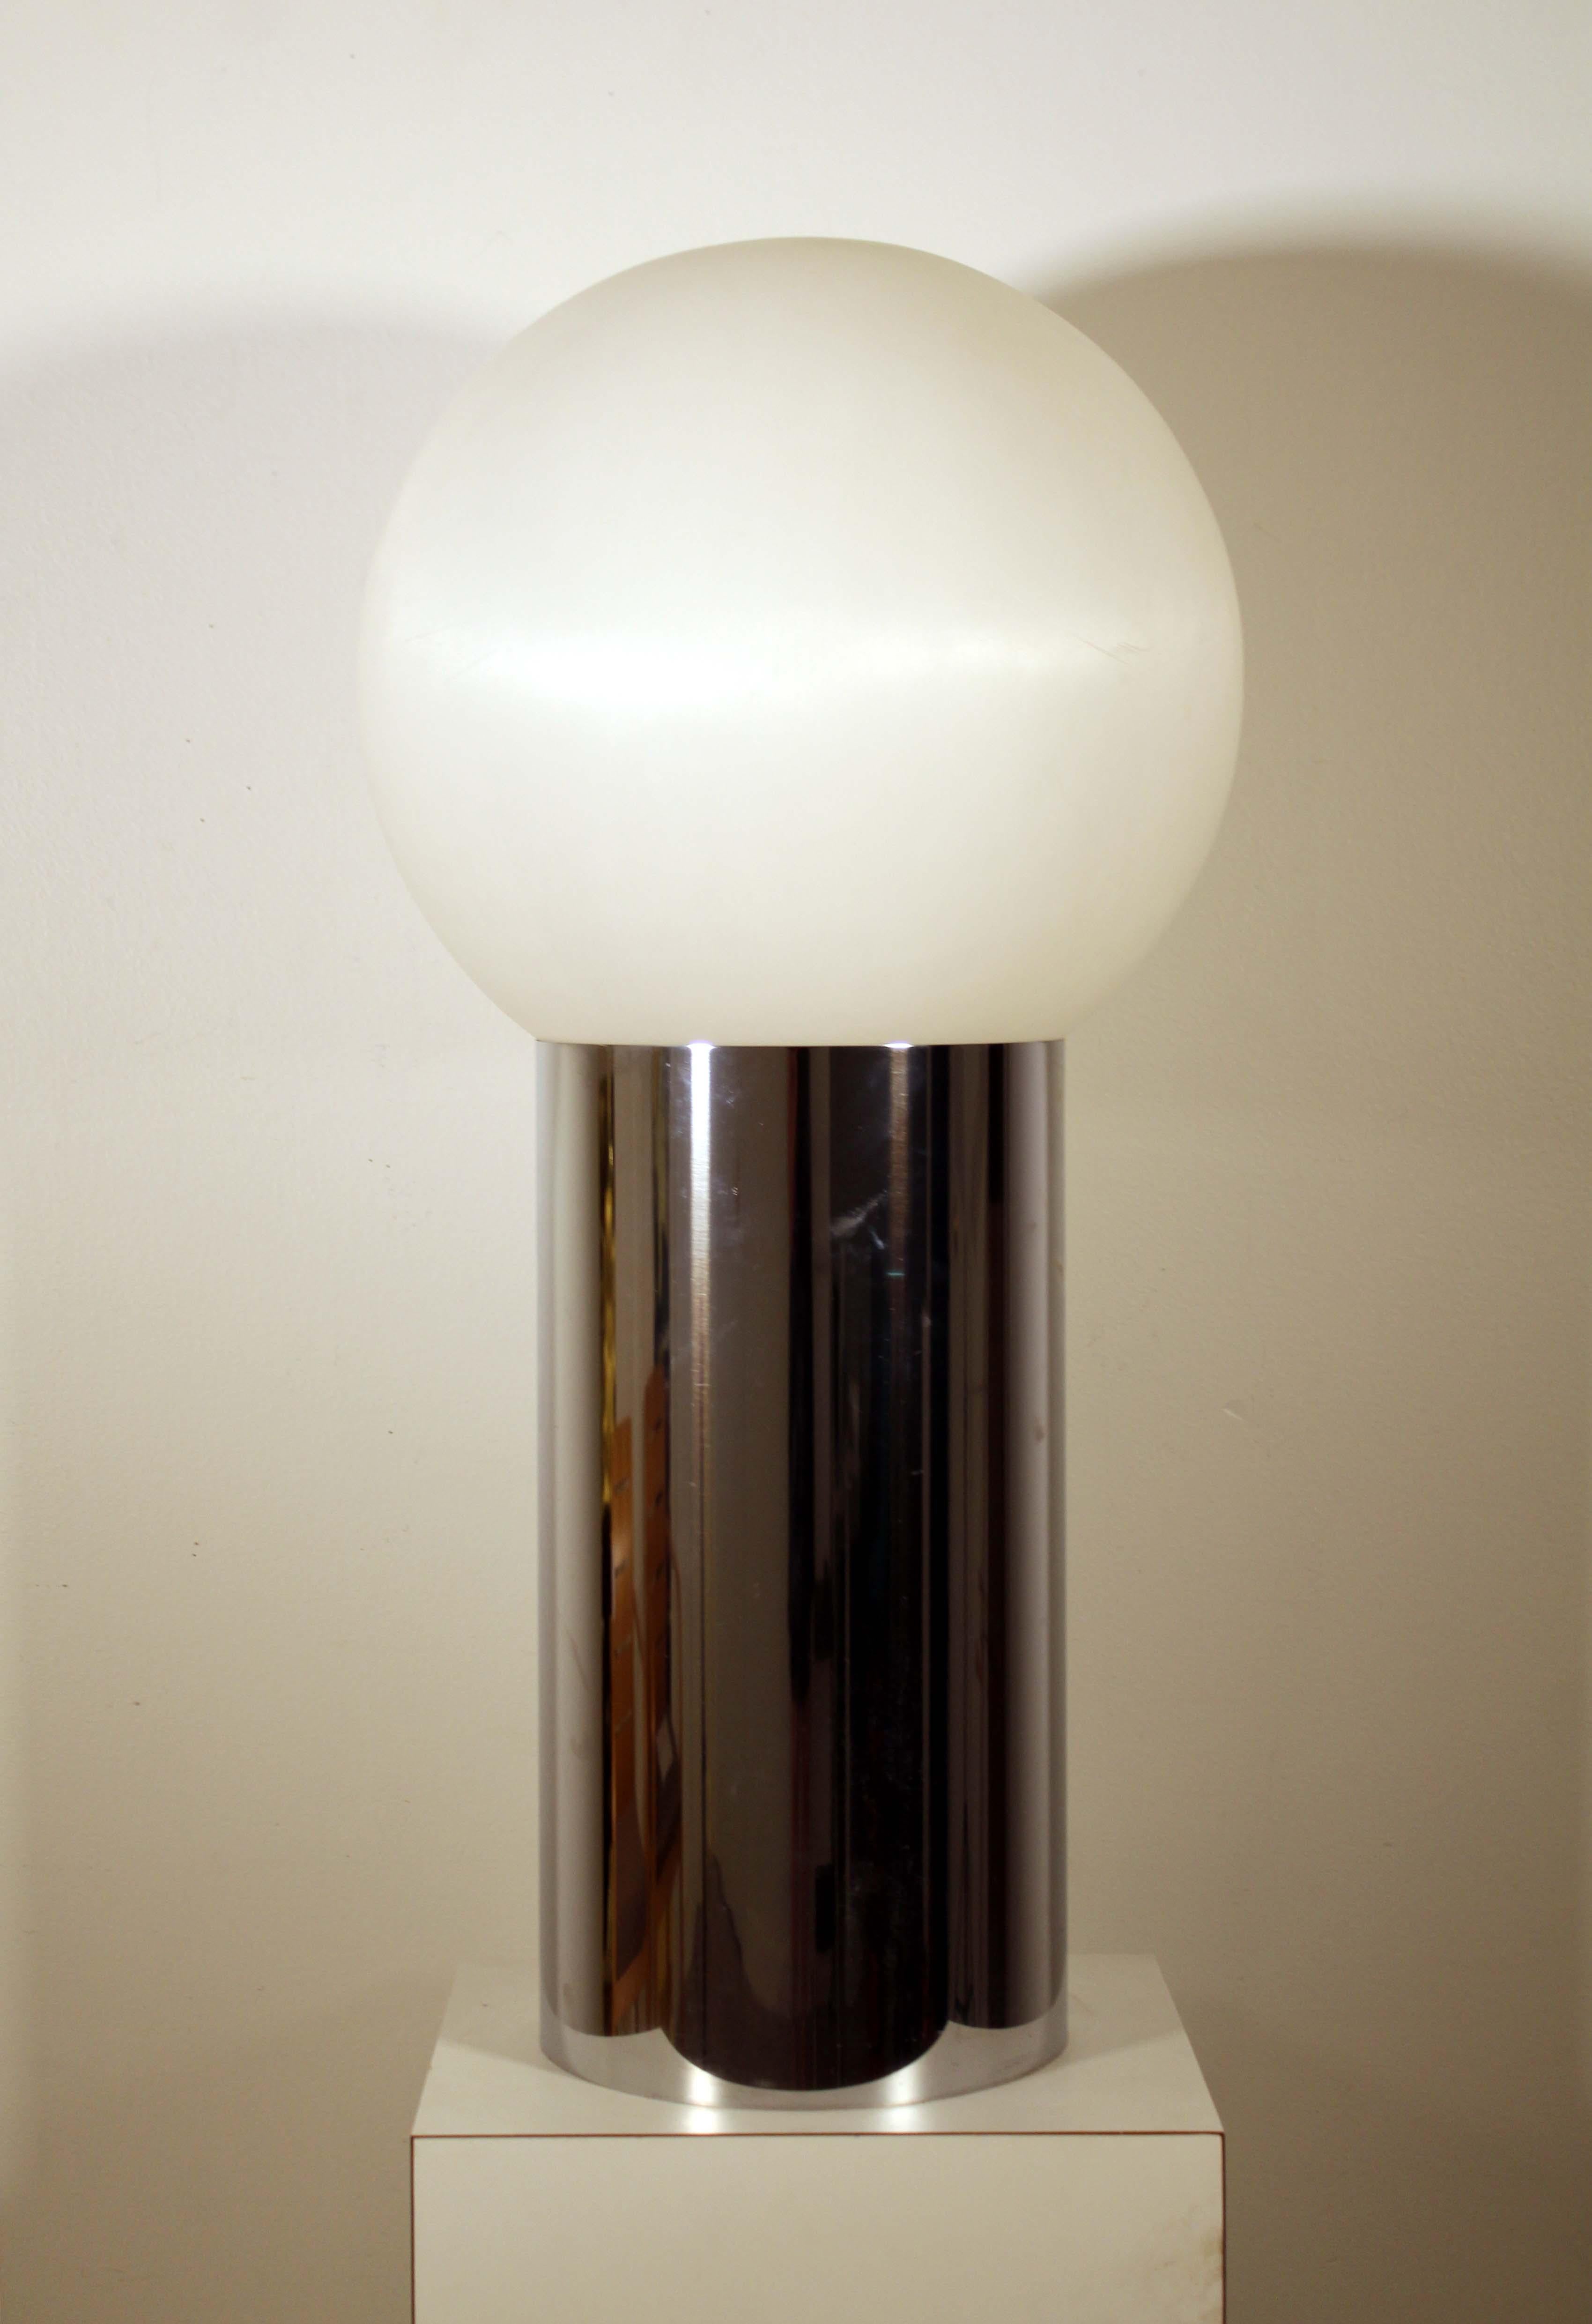 This magnificent Robert Sonneman cylinder lamp. Twist dial to adjust lighting. In very good condition. Dimensions: 16